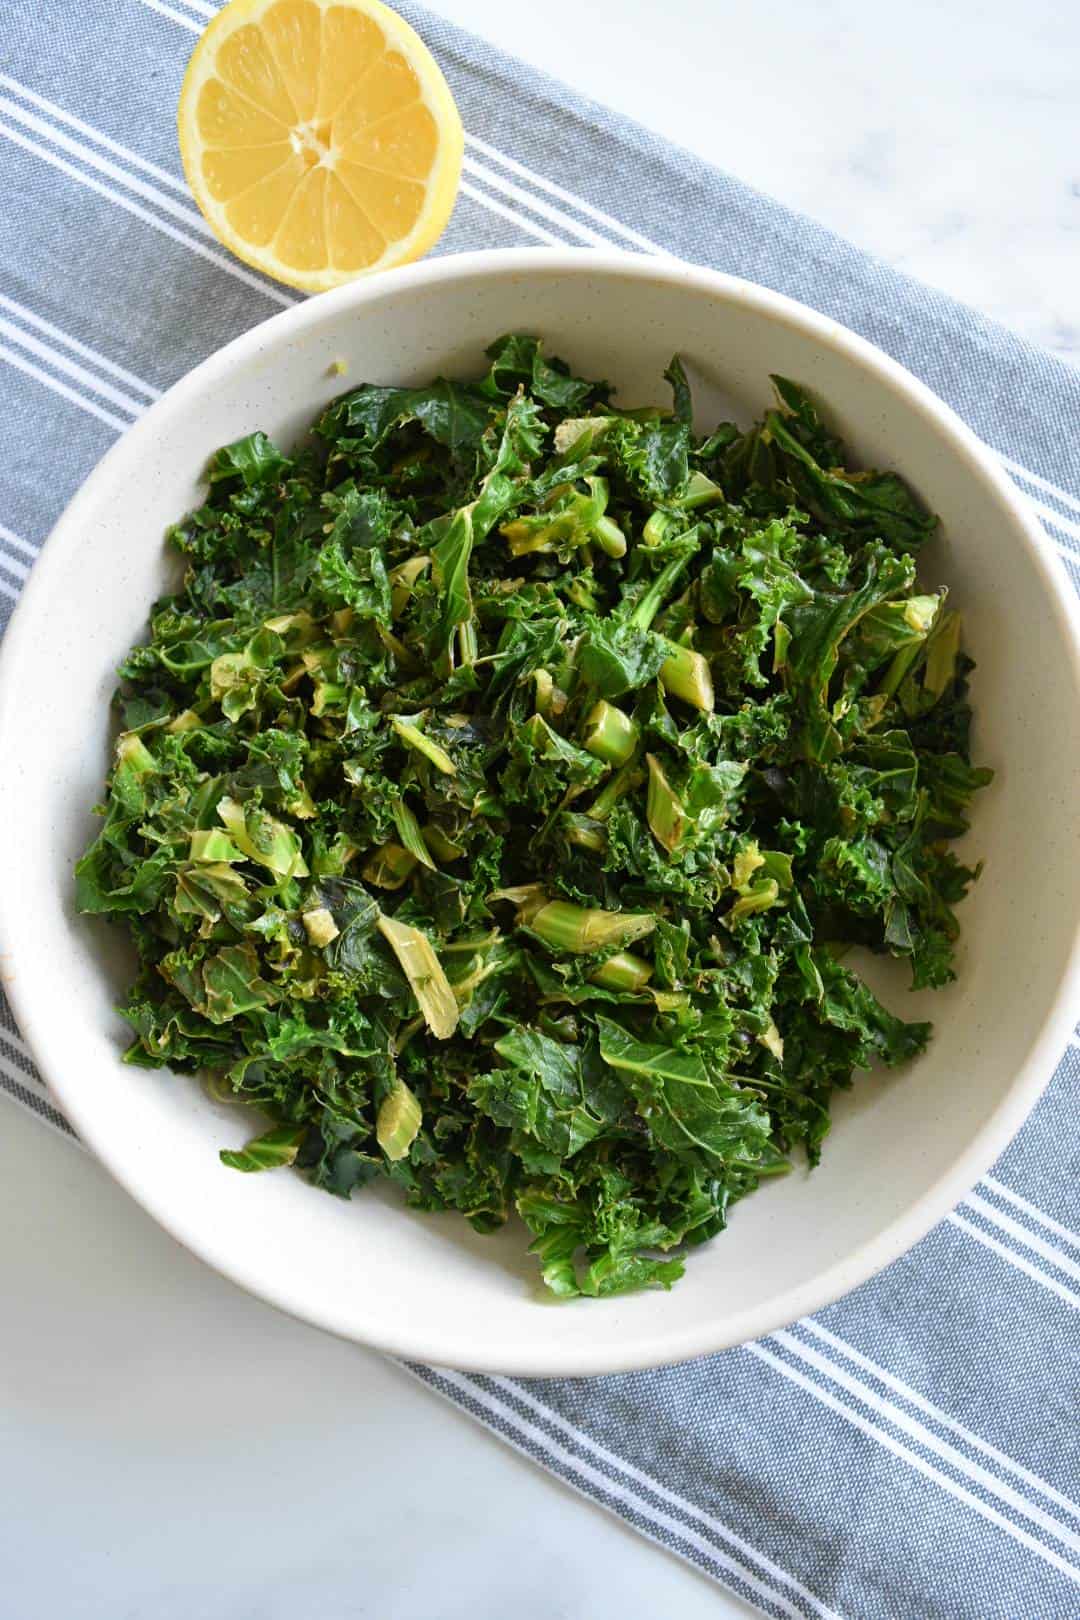 Stewed kale in a bowl with a lemon on the side.